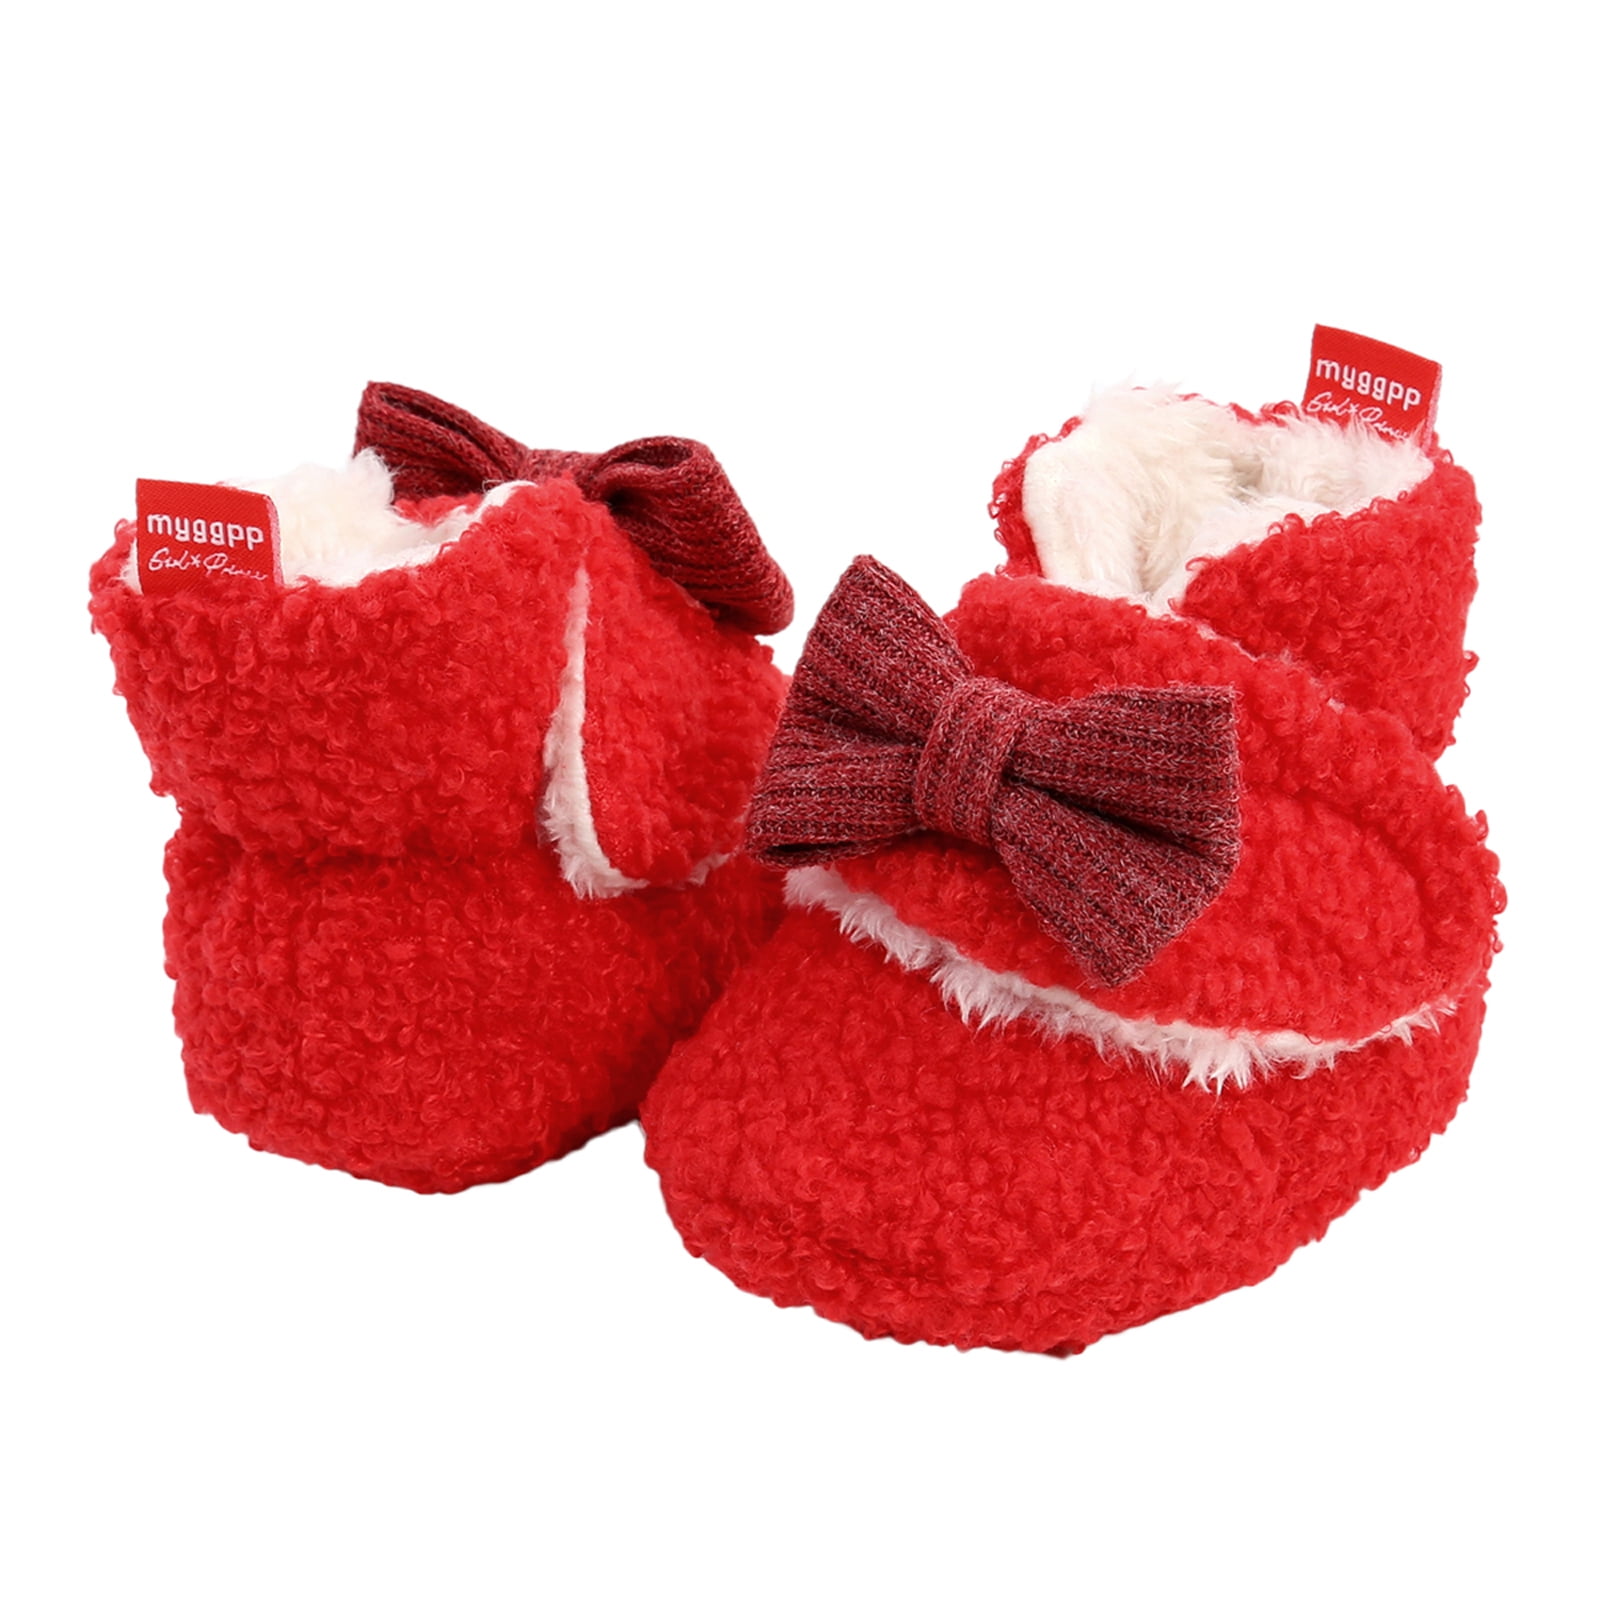 en kreditor Betsy Trotwood flare Puloru Infant Flat Shoes with Decorative Bow Knot, High-top Warm Shoes -  Walmart.com